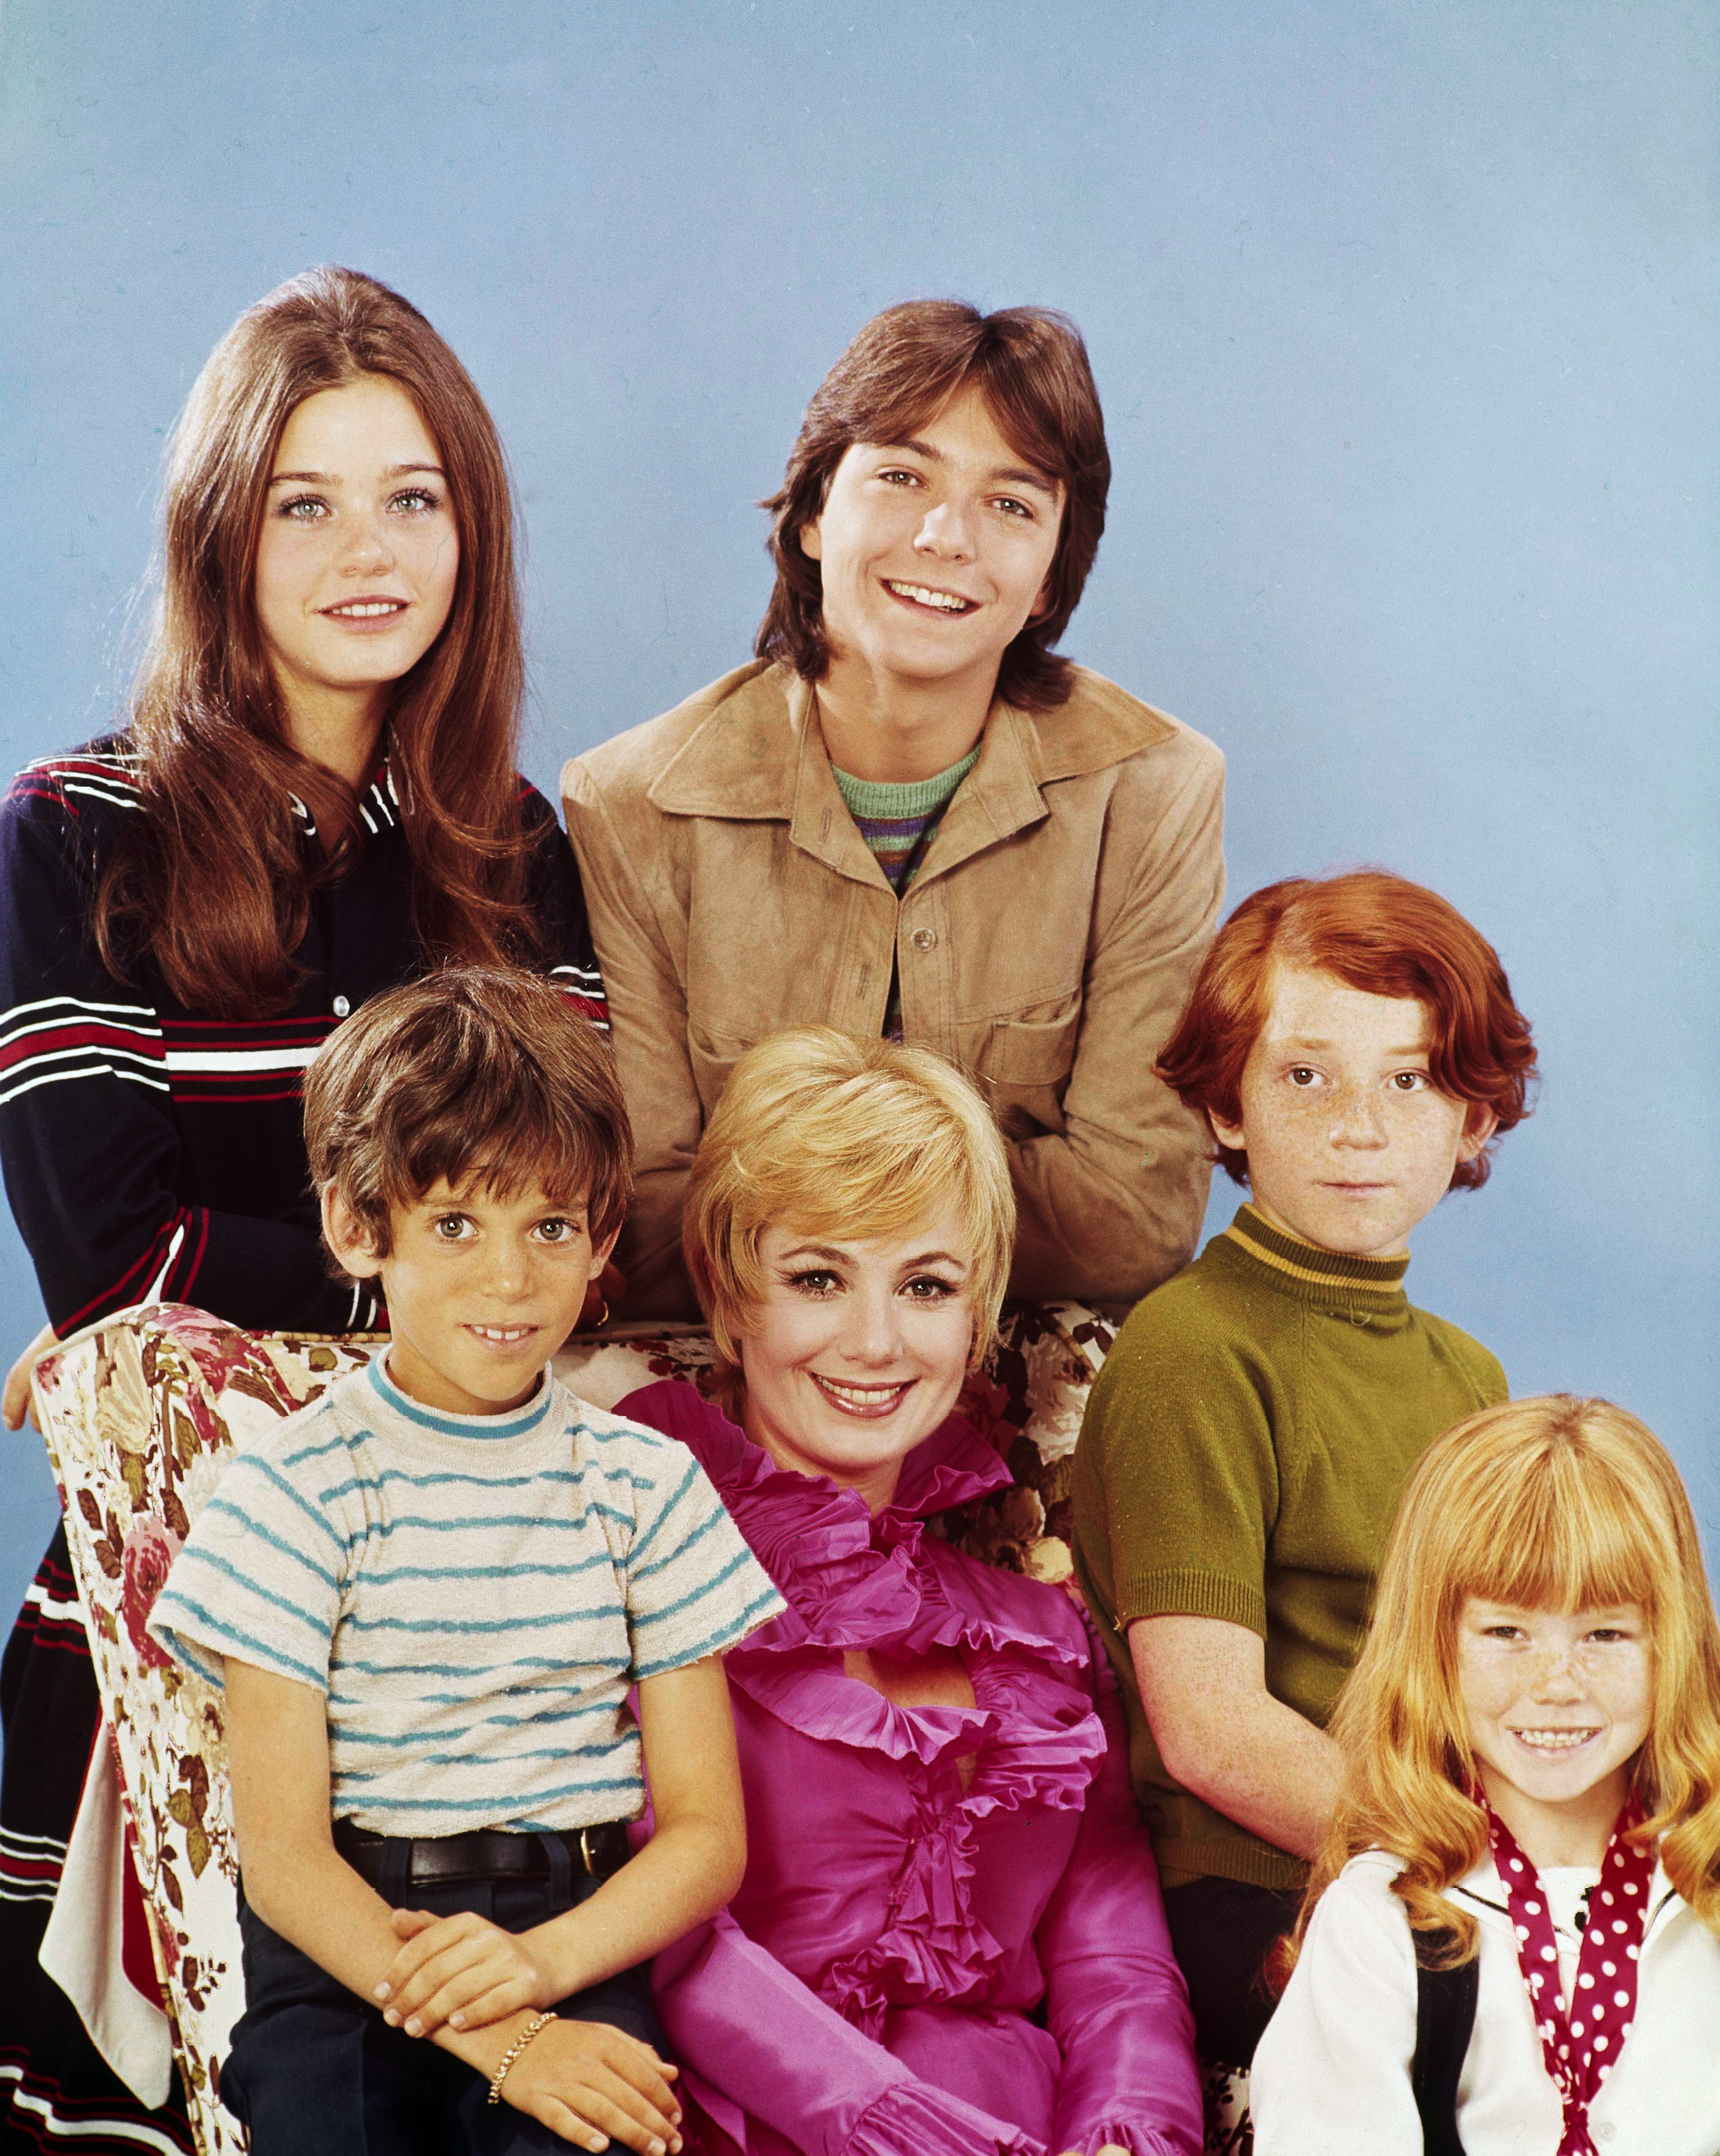 Susan Dey, Jeremy Gelbwaks, David Cassidy, Shirley Jones, Danny Bonaduce and Suzanne Crough photographed for "The Partridge Family," circa 1970. | Source: Getty Images